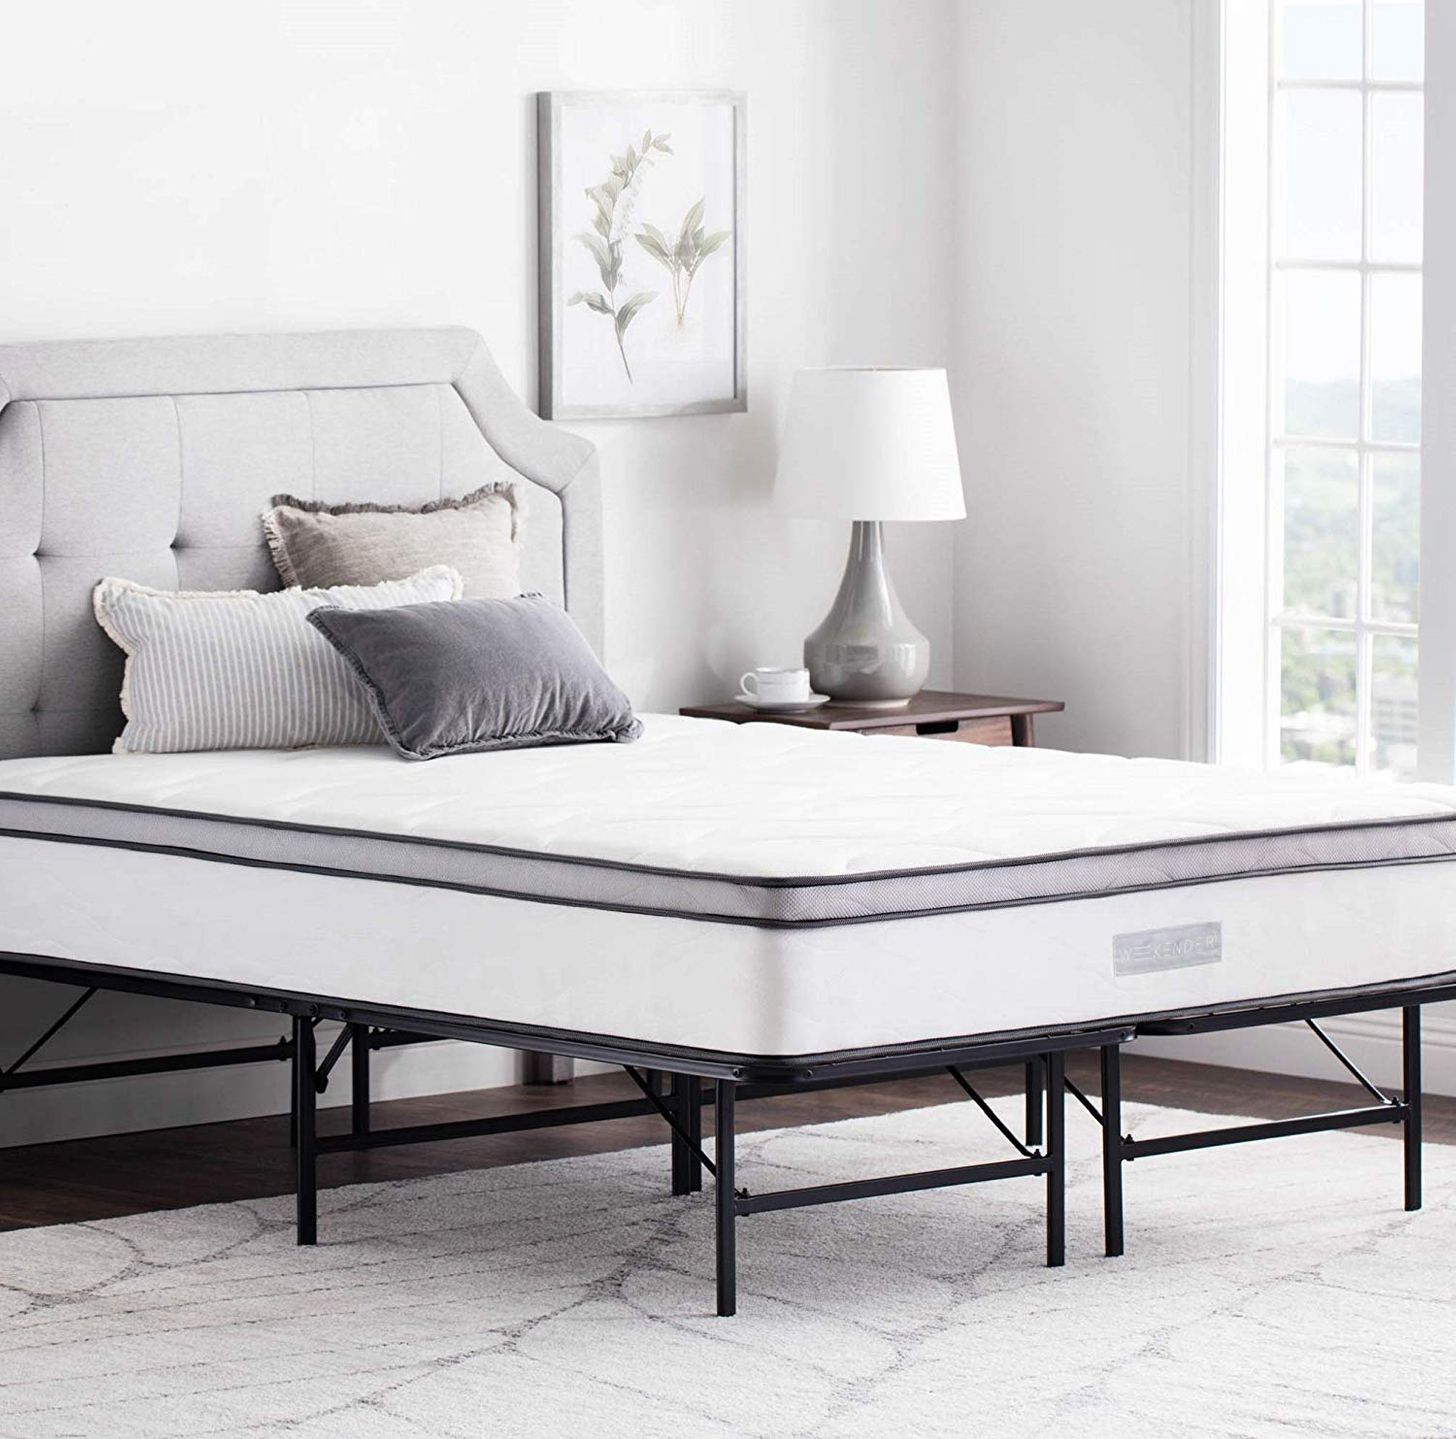 19 Best Metal Bed Frames 2022 The, Twin Size Folding Air Bed Frames